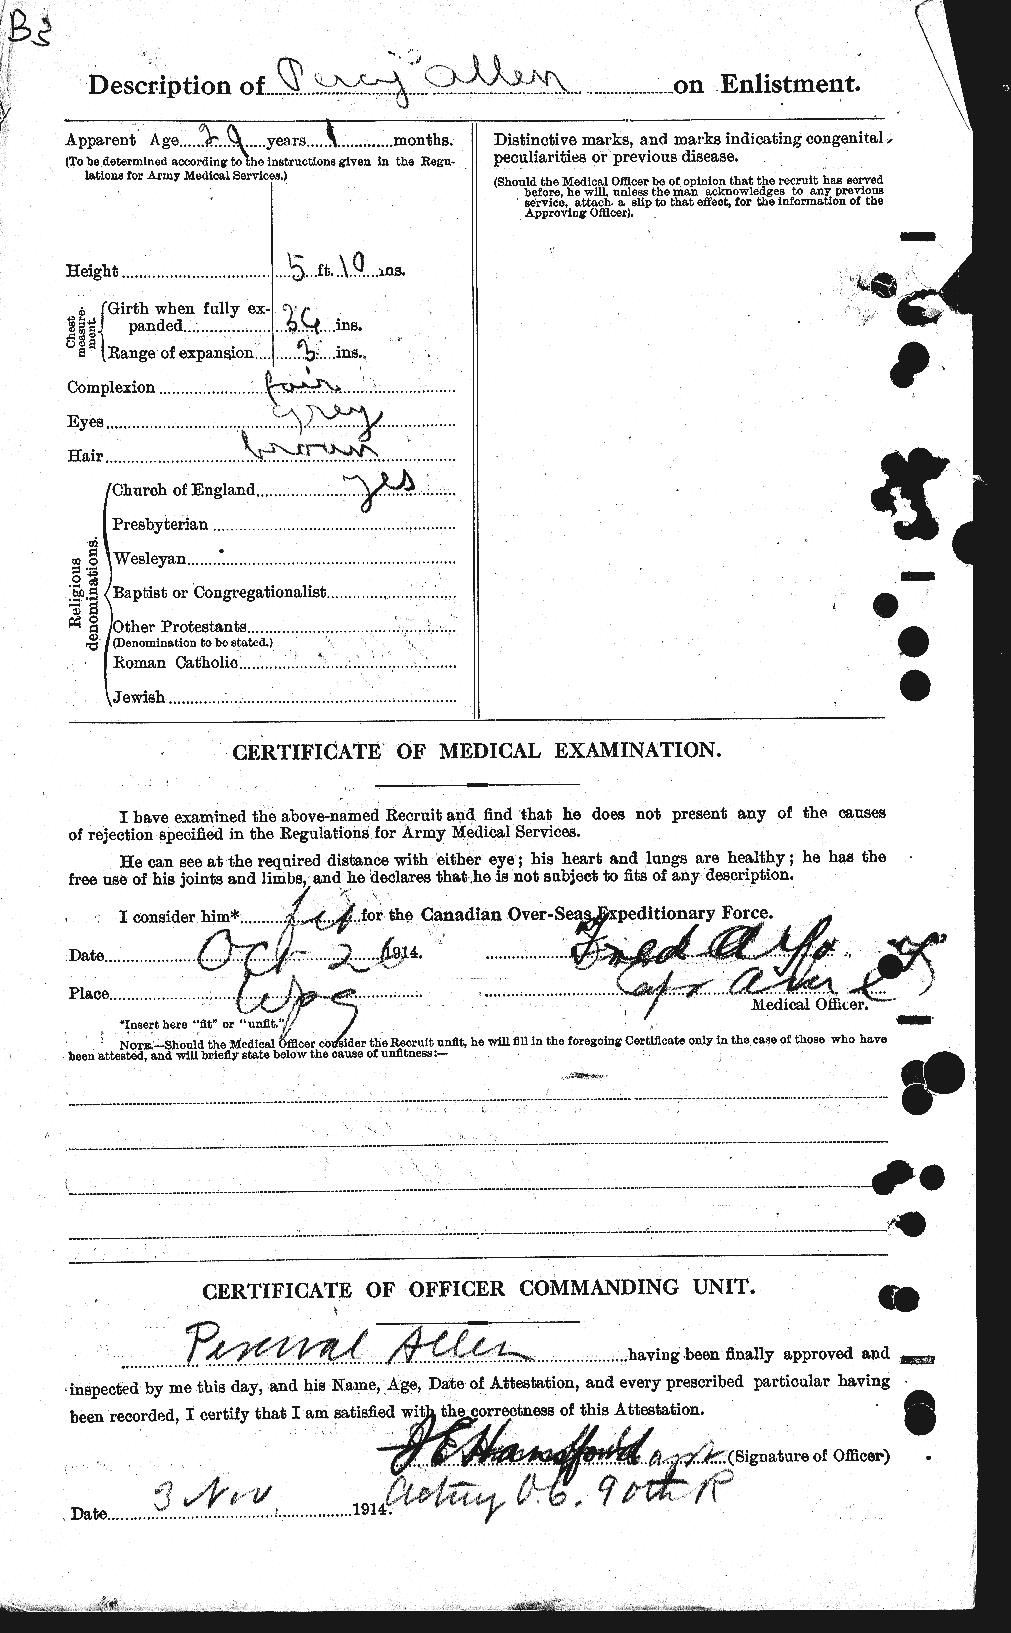 Personnel Records of the First World War - CEF 207110b